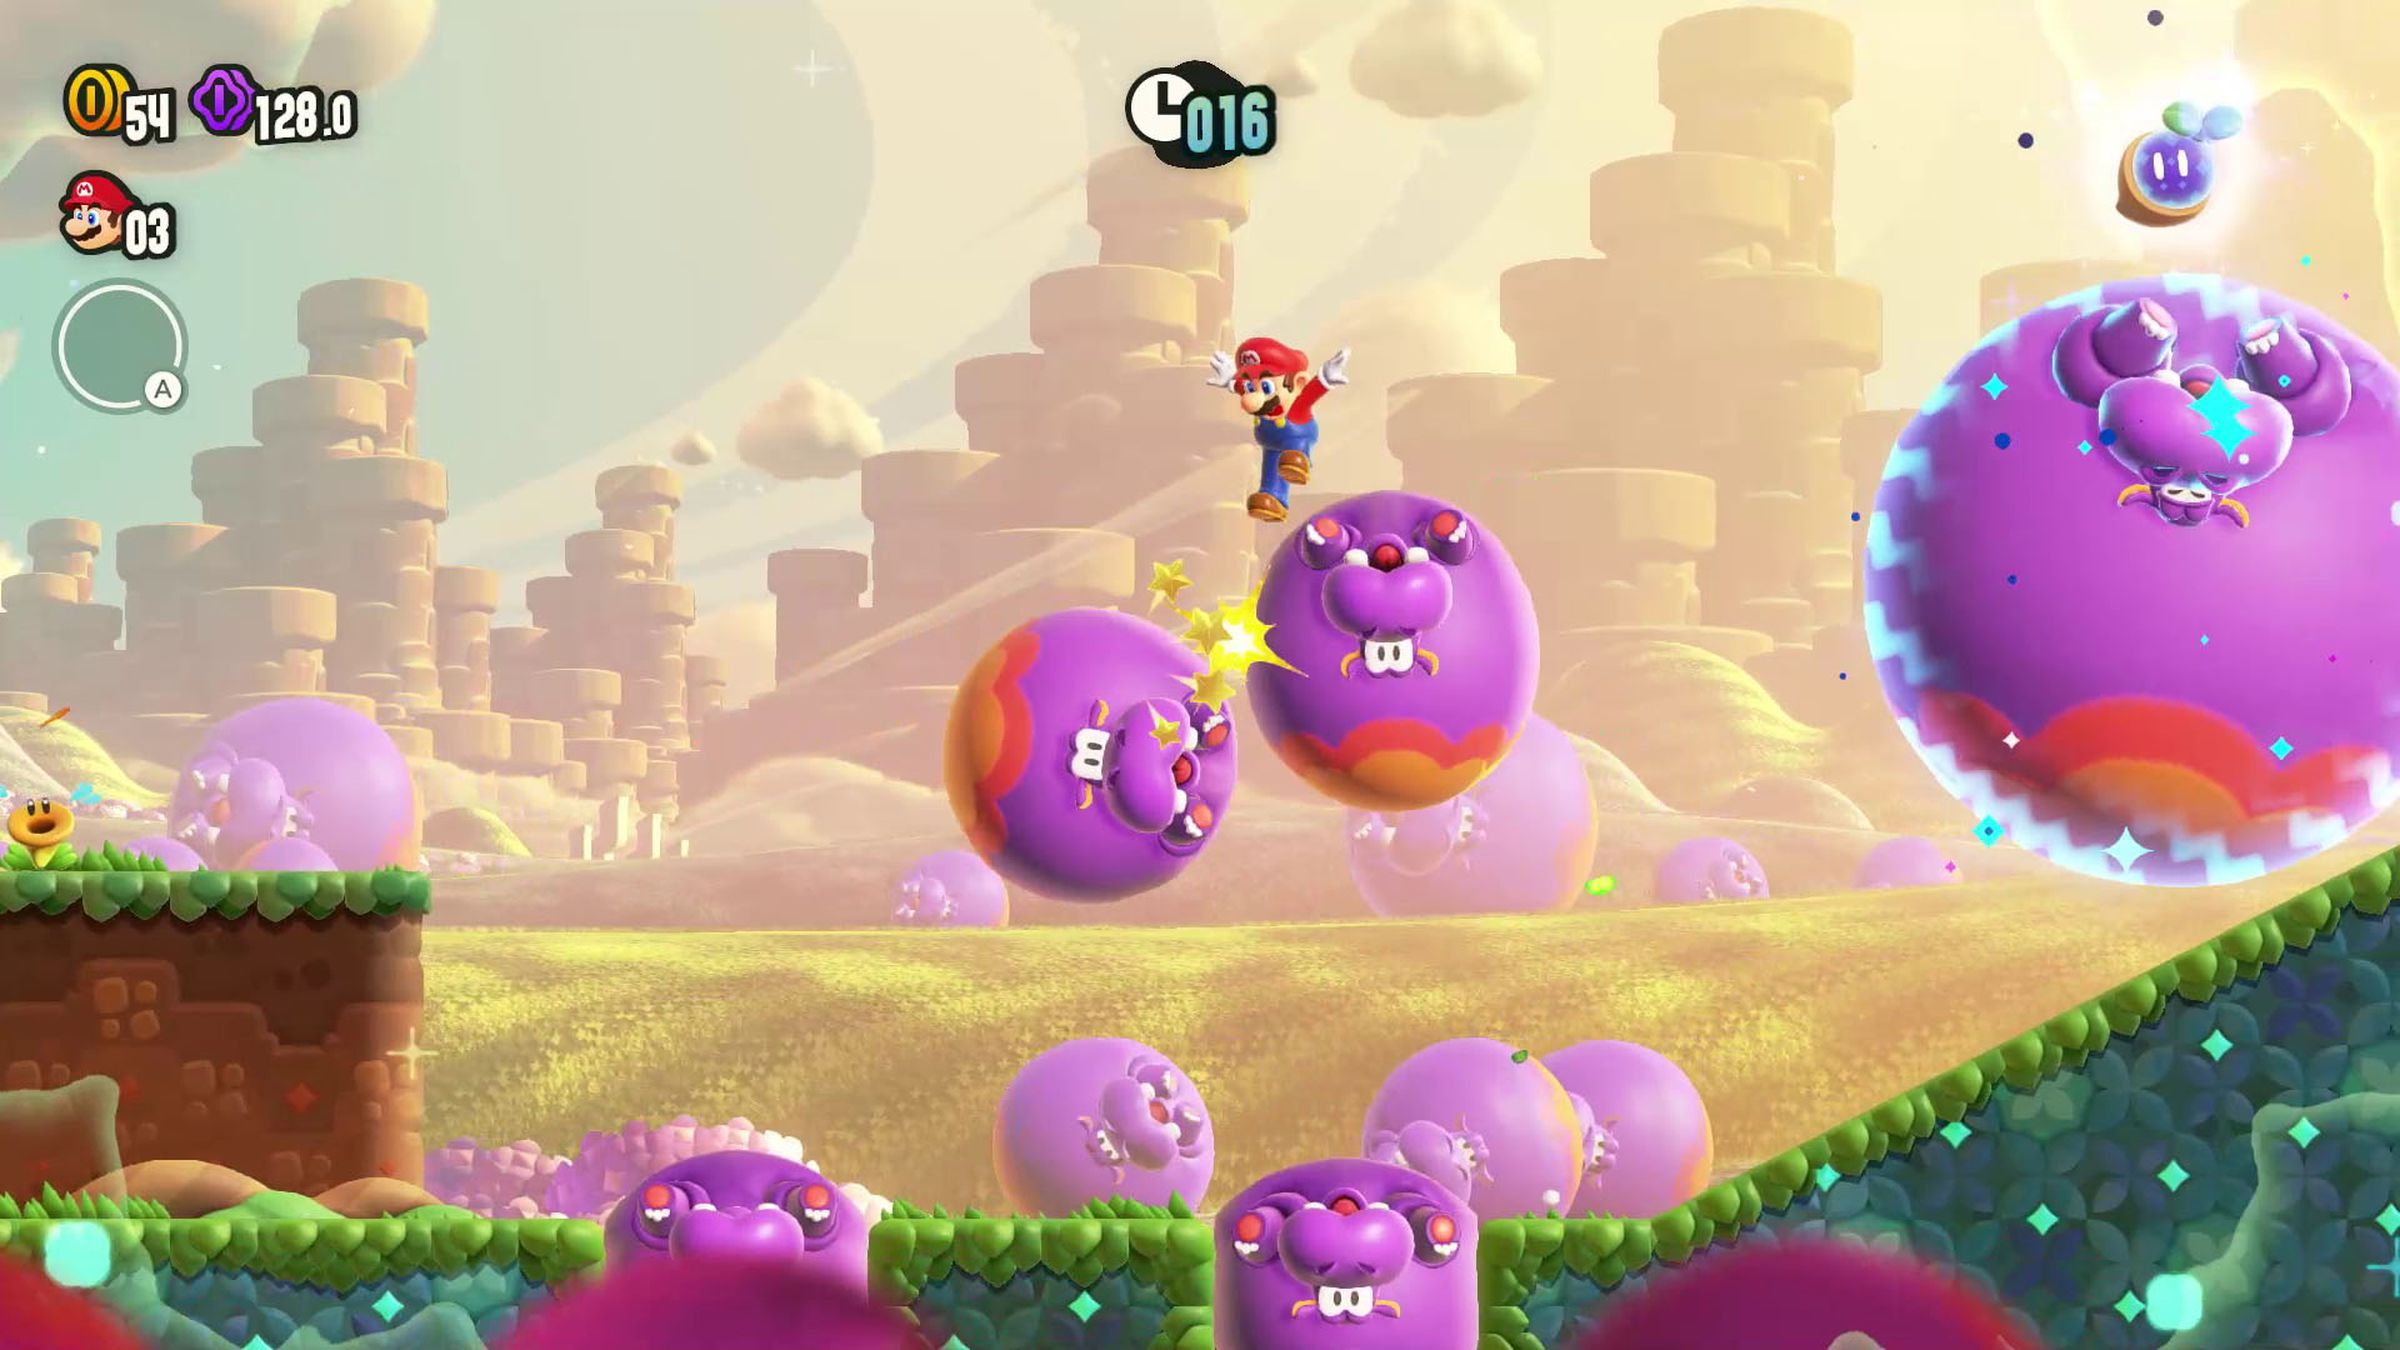 A screenshot from the video game Super Mario Bros. Wonder in which Mario bounces around a group of round purple hippos.